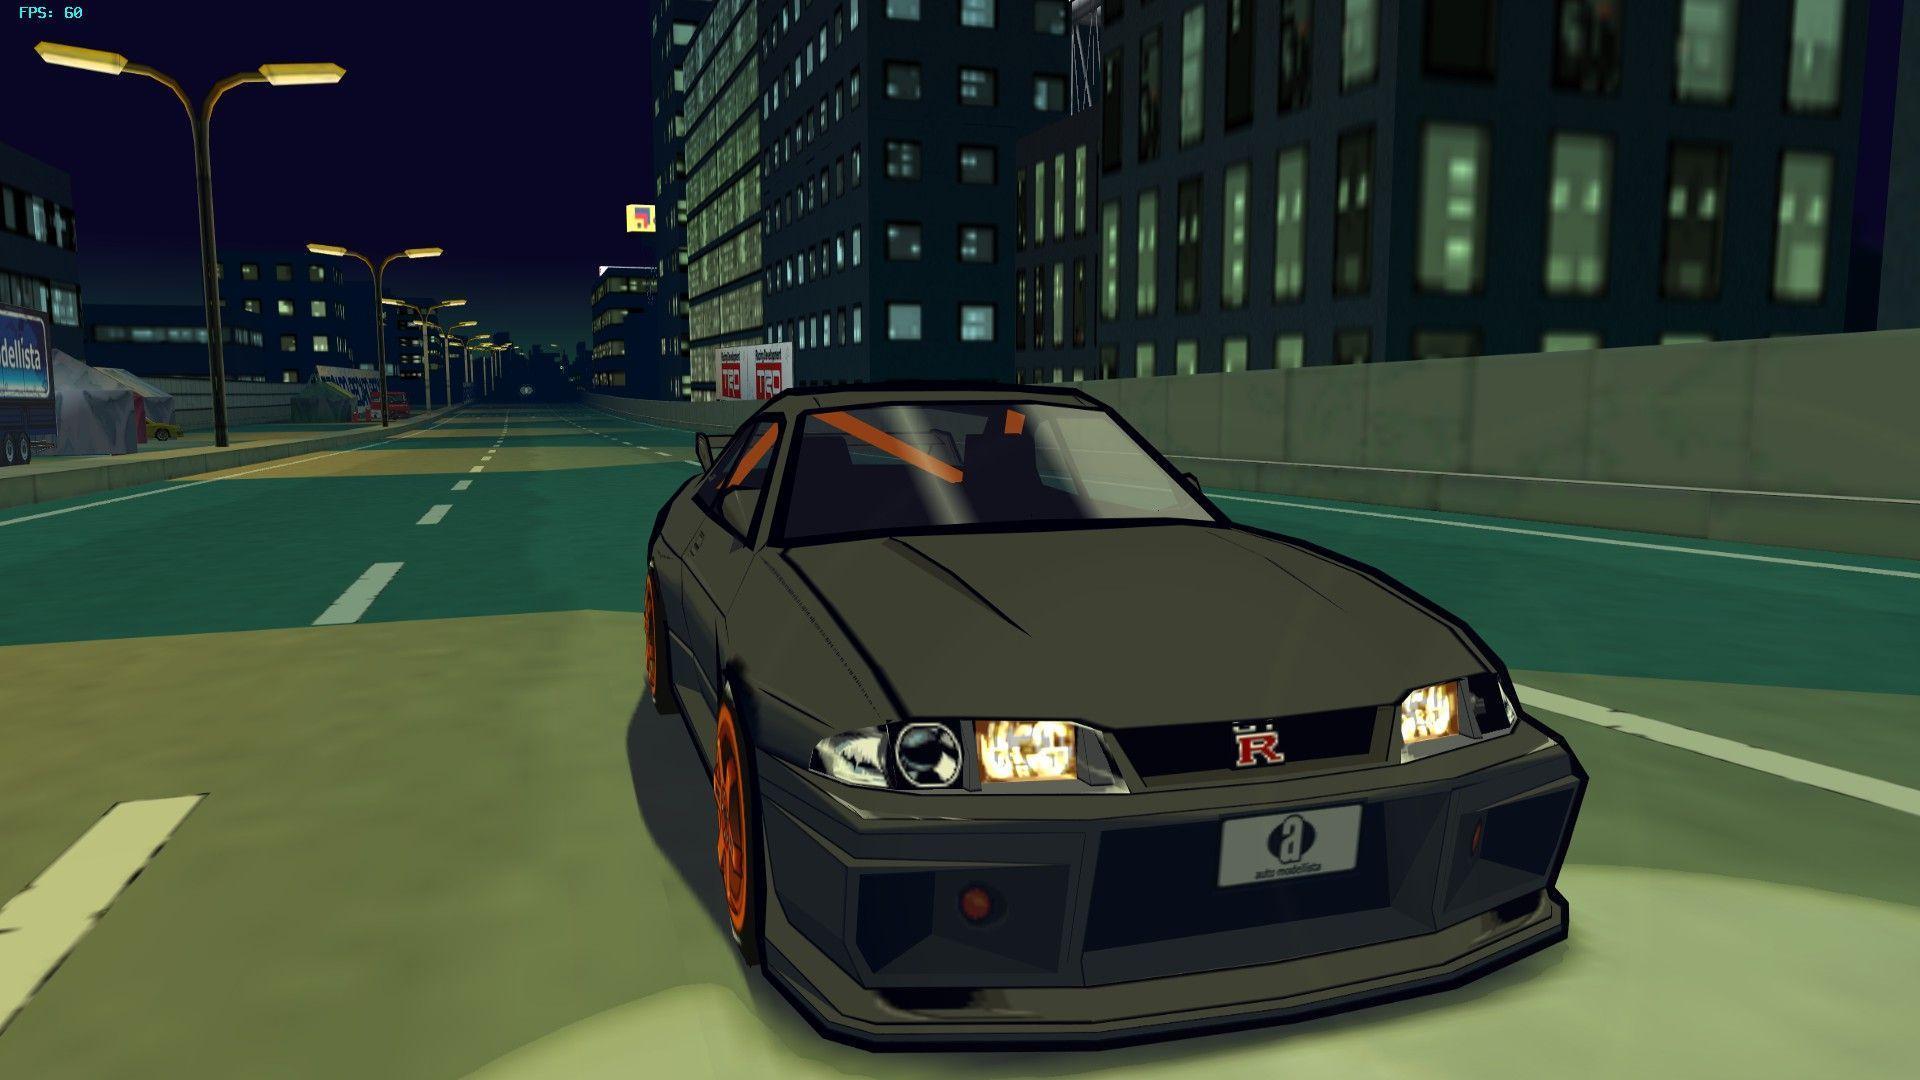 Wangan Midnight Expressway Forums > Post your random thoughts. 3D